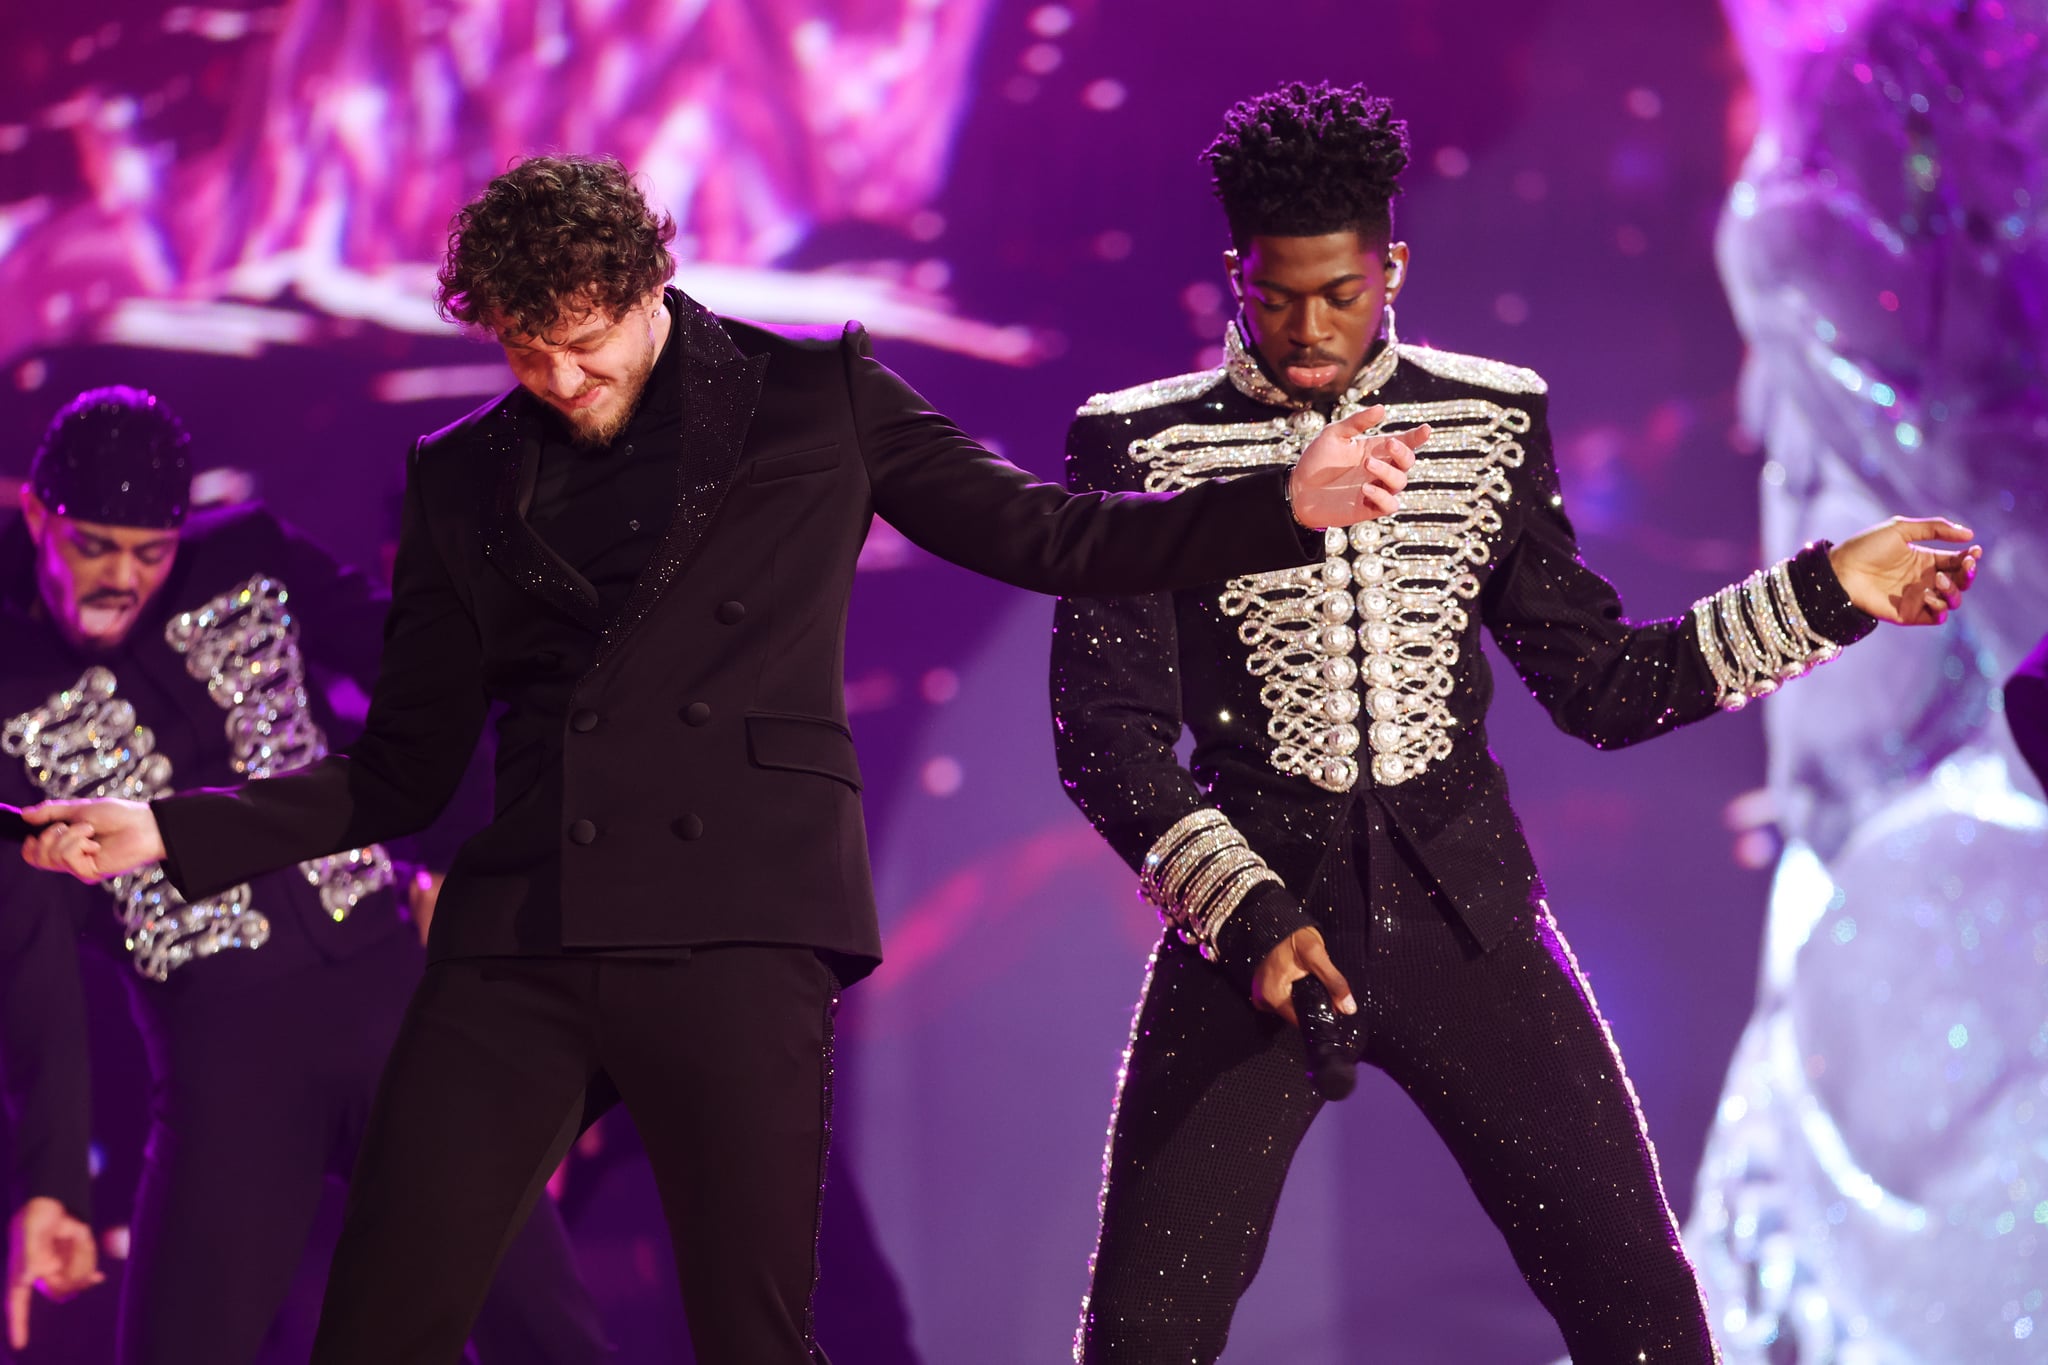 LAS VEGAS, NEVADA - APRIL 03: (L-R) Jack Harlow and Lil Nas X perform onstage during the 64th Annual GRAMMY Awards at MGM Grand Garden Arena on April 03, 2022 in Las Vegas, Nevada. (Photo by Rich Fury/Getty Images for The Recording Academy)